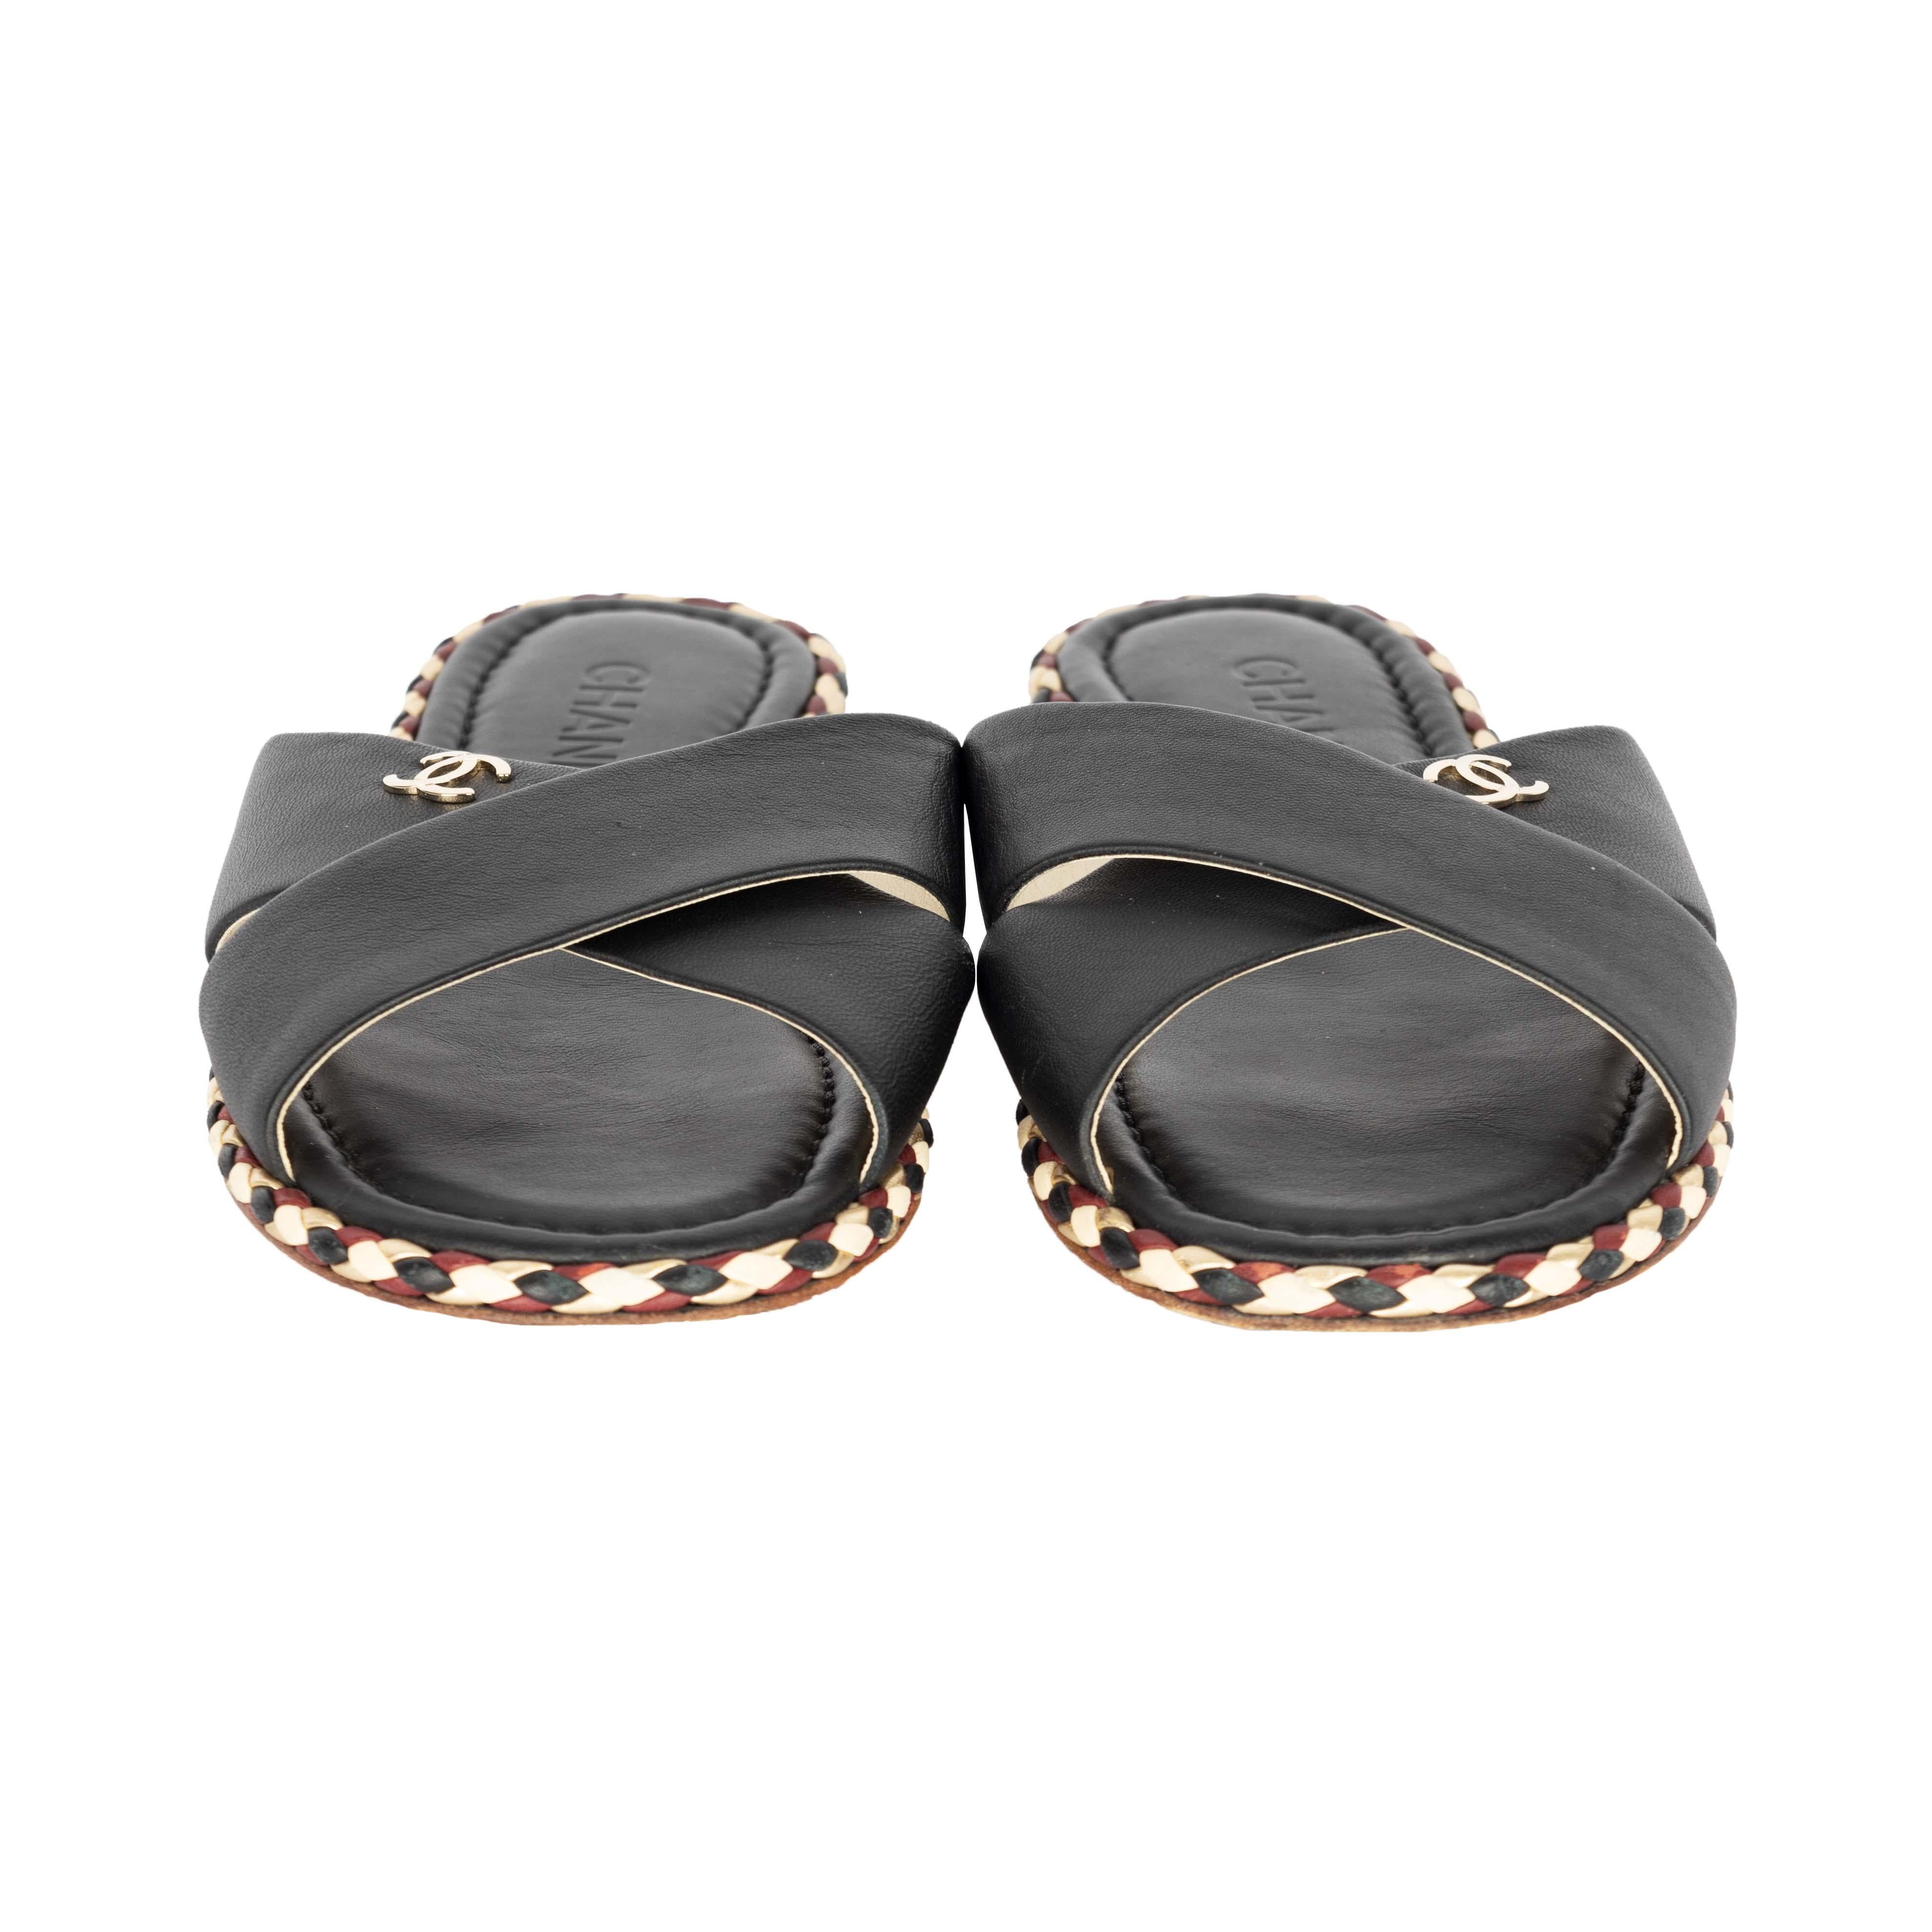 Add a touch of elegance to your ensemble with these exquisitely crafted Chanel Slides. Made with black leather, the crisscross straps are accented with the CC logo while the outsole is embellished with a multicolor braid. The branded flair is